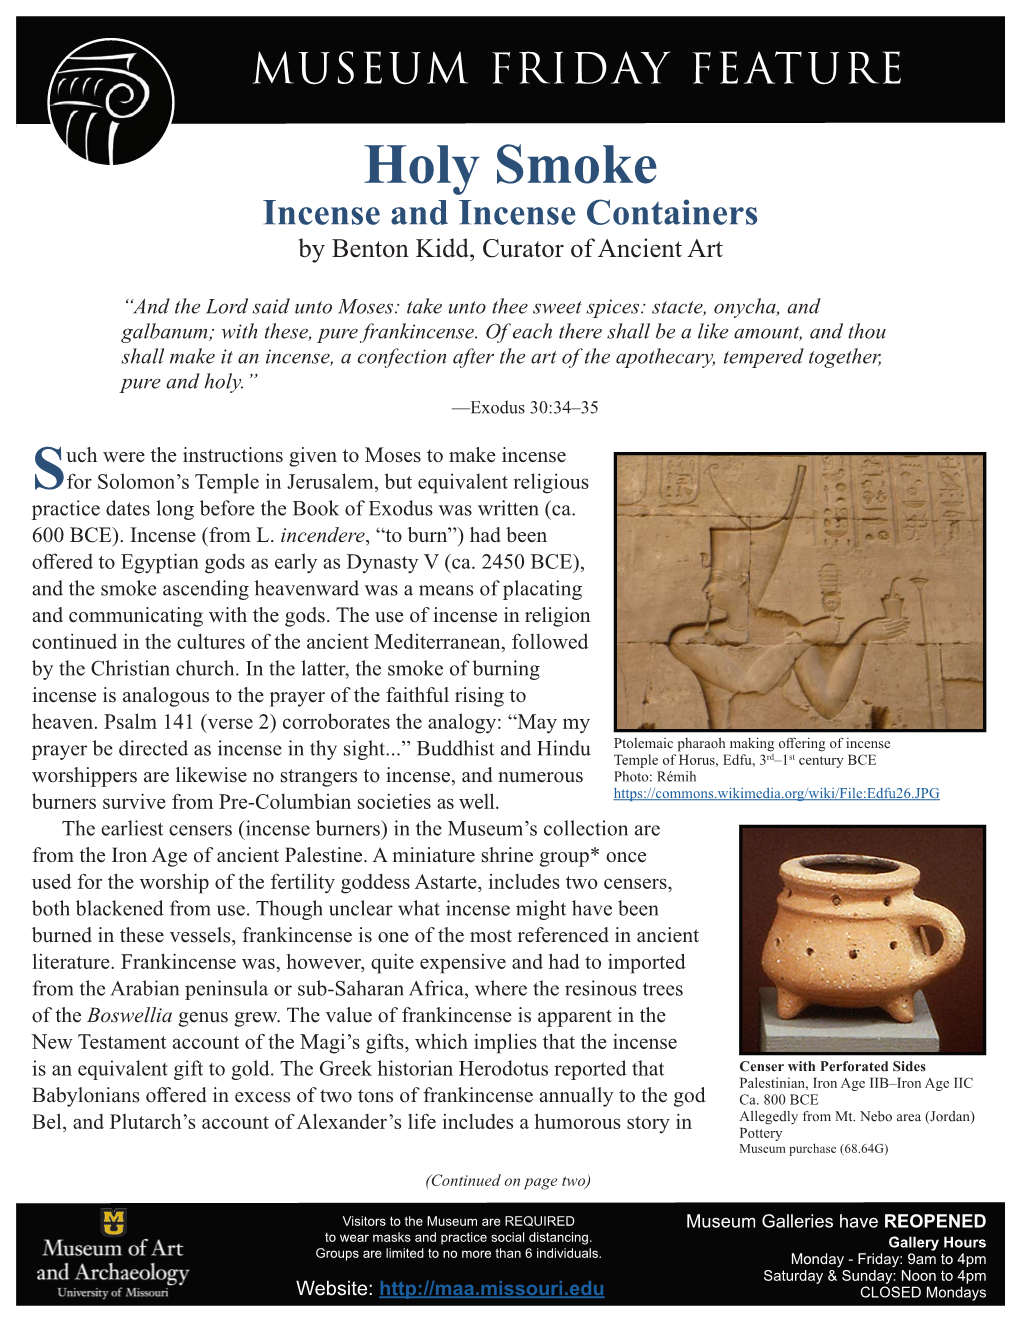 Holy Smoke Incense and Incense Containers by Benton Kidd, Curator of Ancient Art